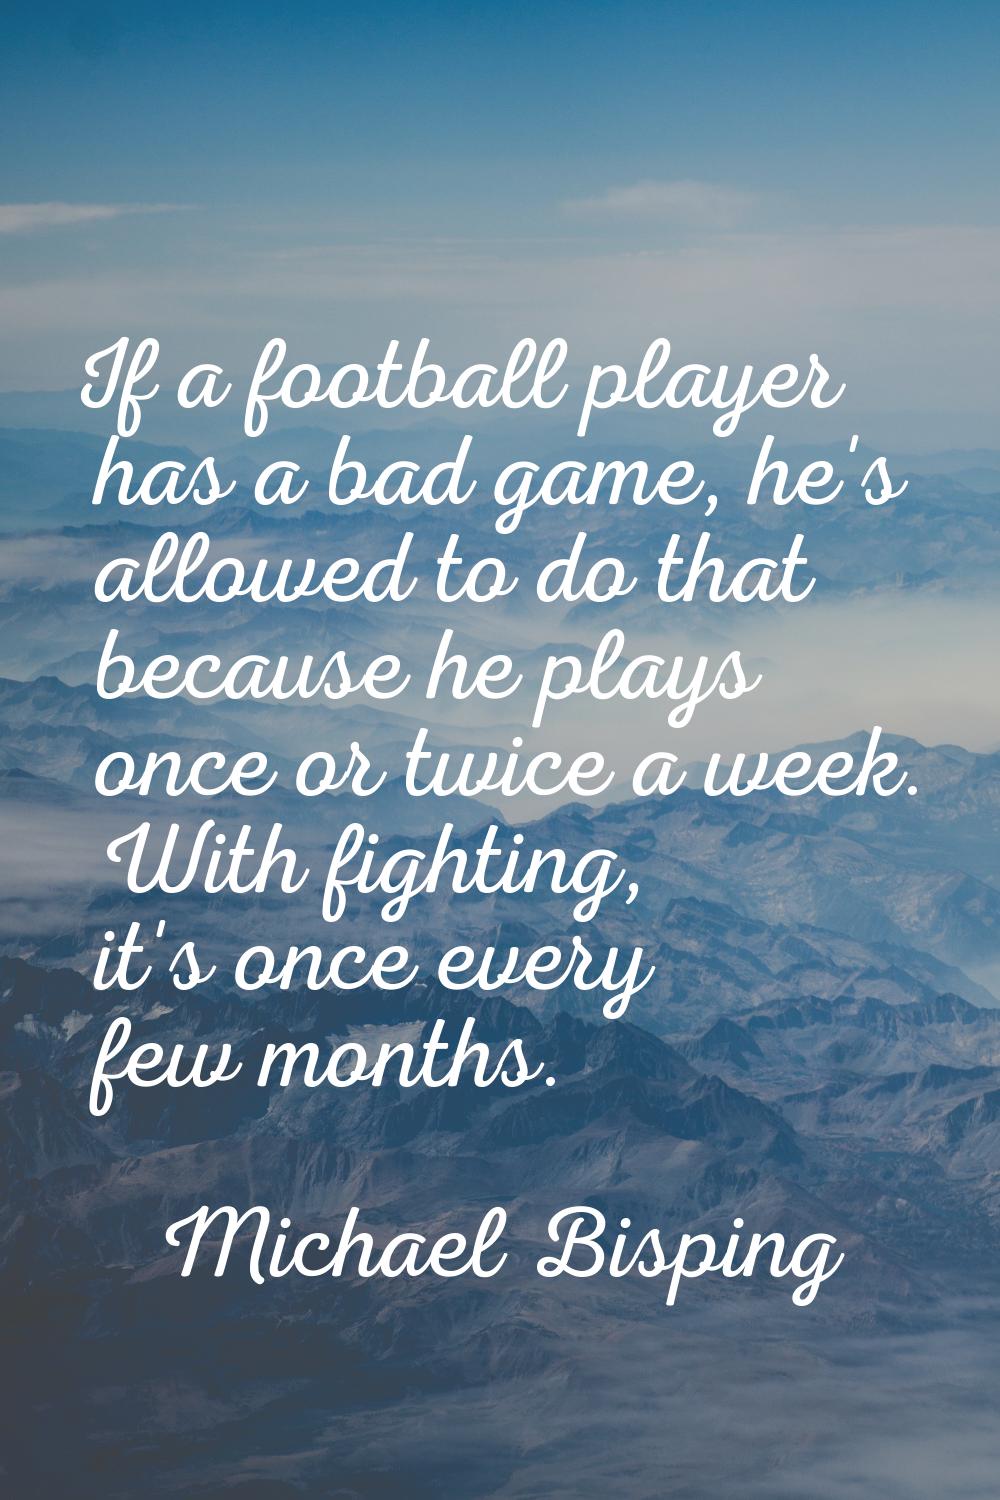 If a football player has a bad game, he's allowed to do that because he plays once or twice a week.